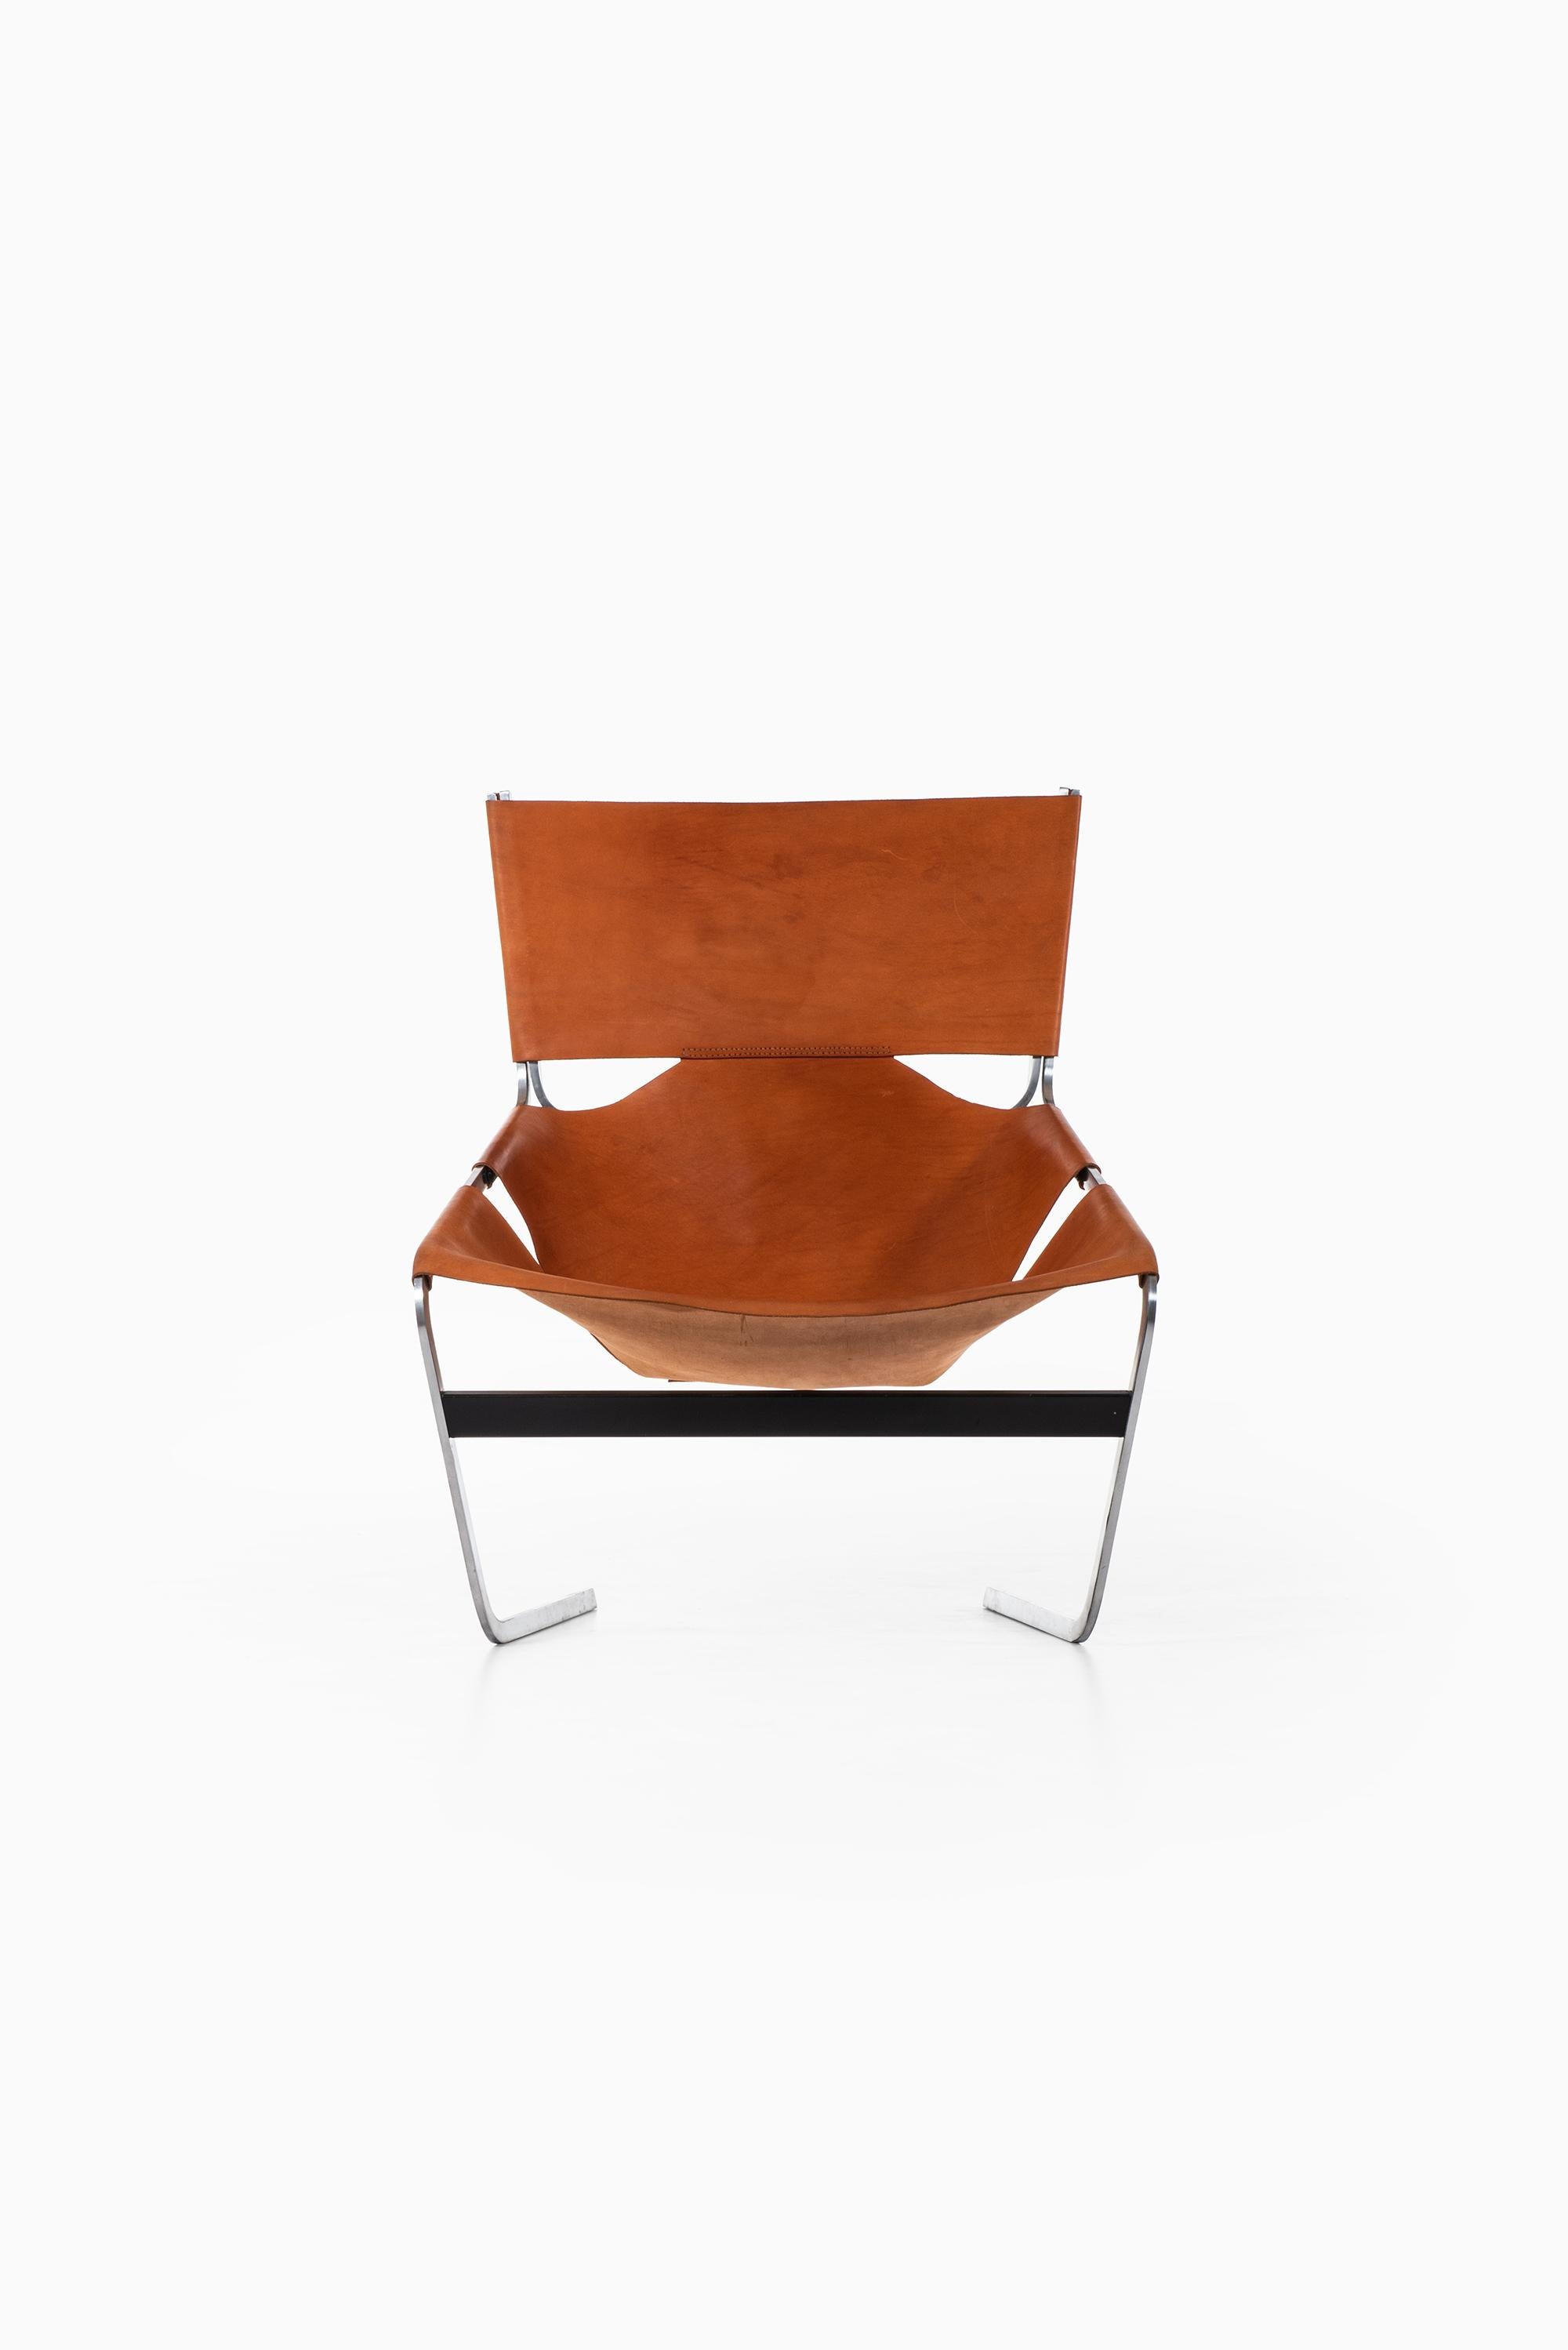 Rare easy chair model F-444 designed by Pierre Paulin. Produced by Artifort in Netherlands.